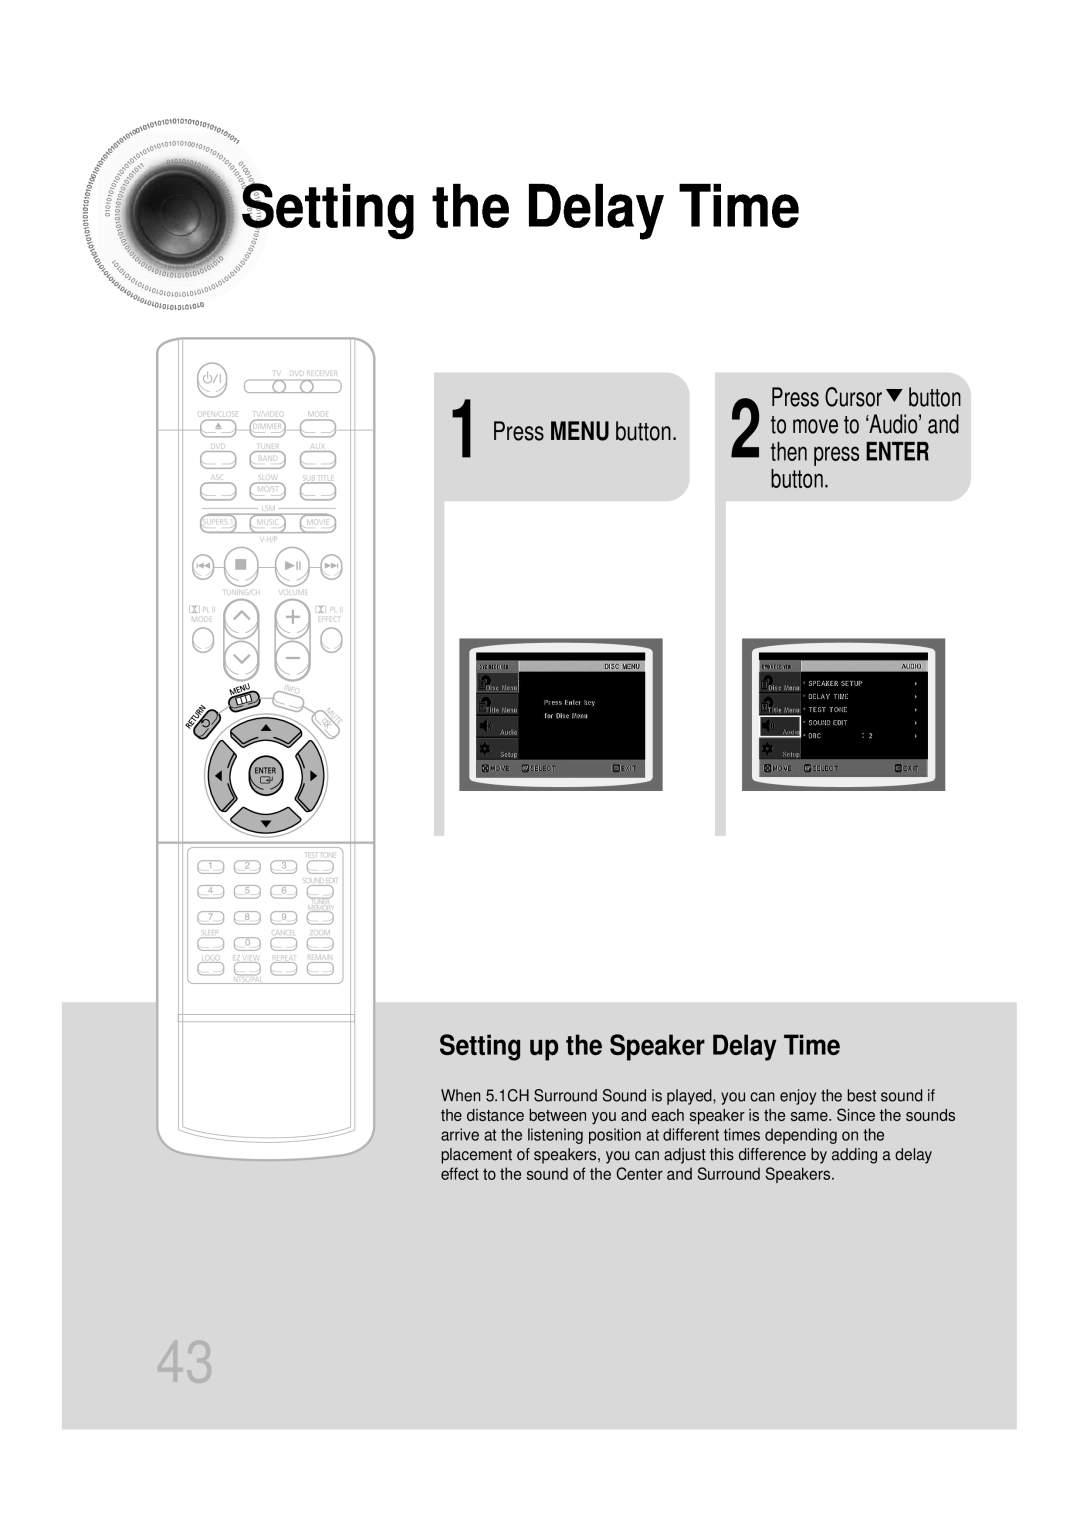 Samsung HT-DB350, HT-DB1650 instruction manual Settingthe Delay Time, Setting up the Speaker Delay Time, Press Cursor button 